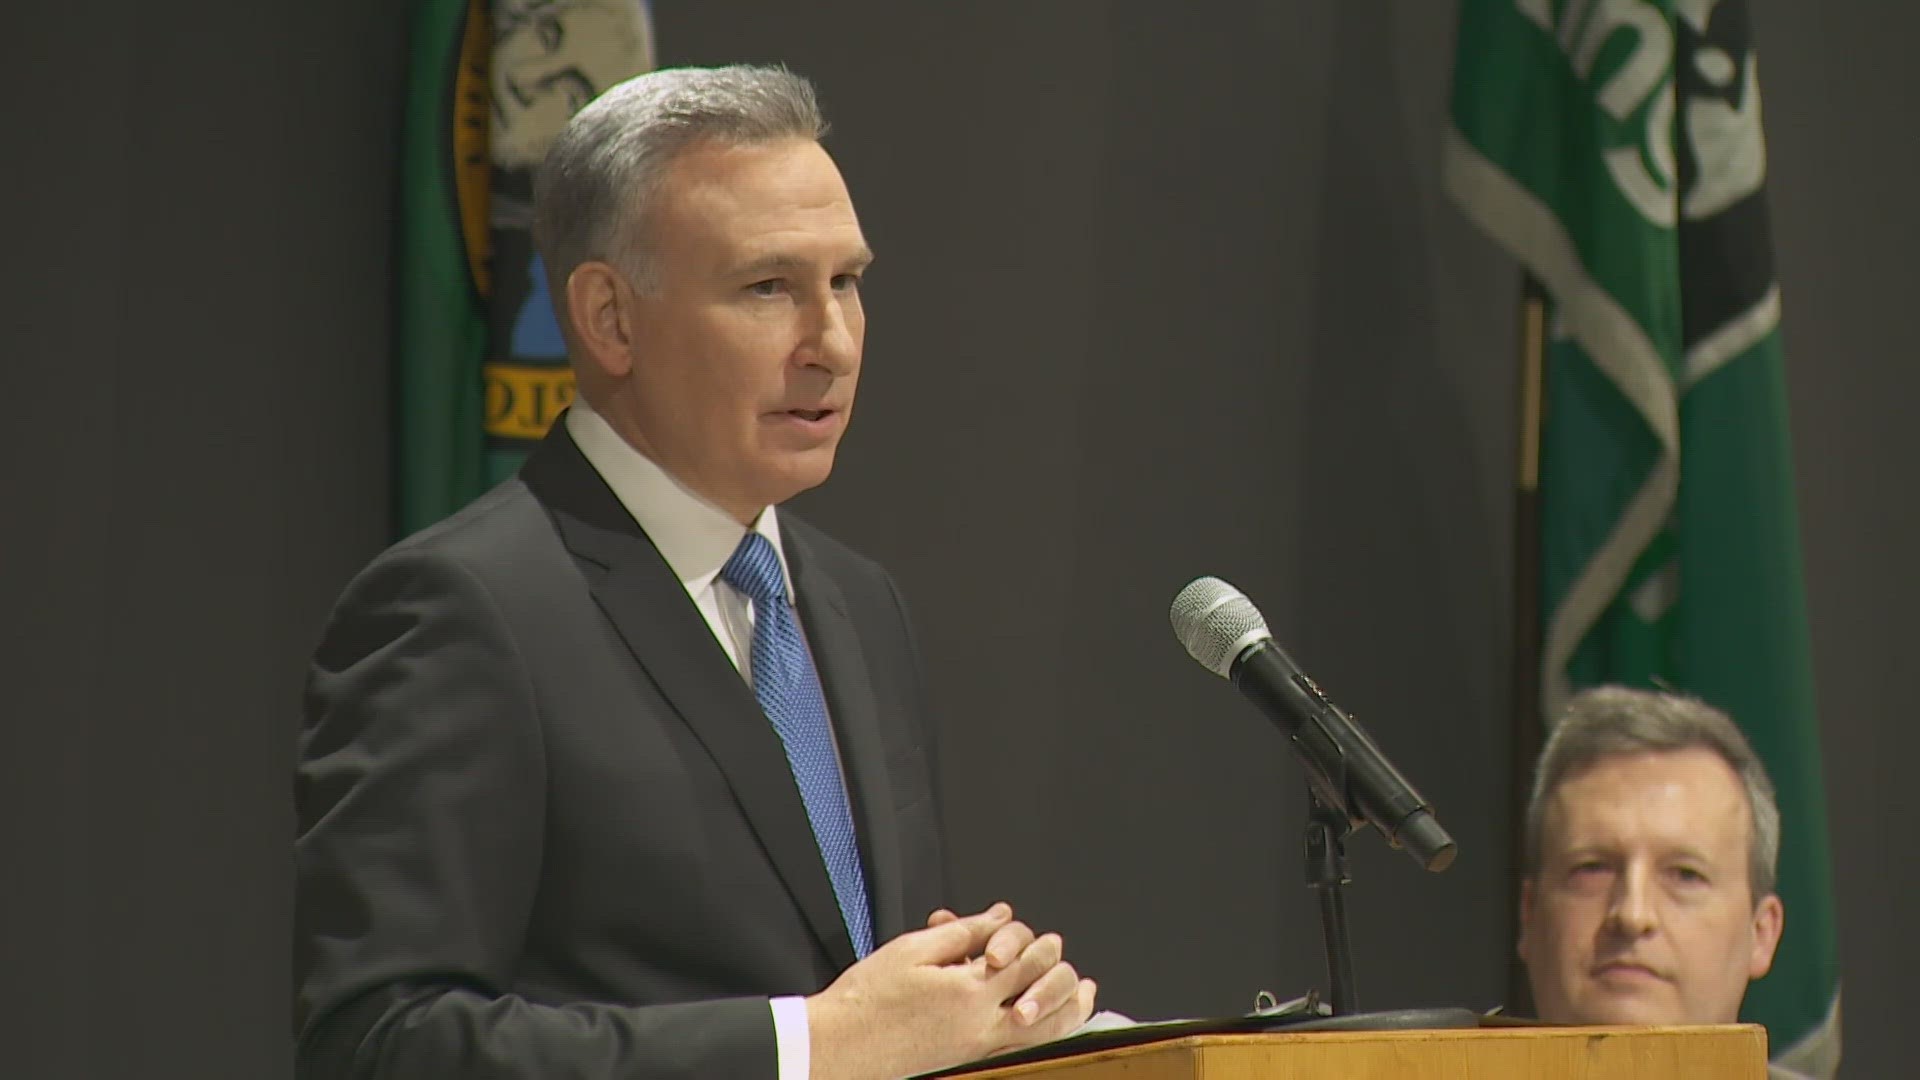 King County Executive Dow Constantine focused on homelessness, public safety and behavioral health in his annual "State of the County" address in Seattle on Tuesday.